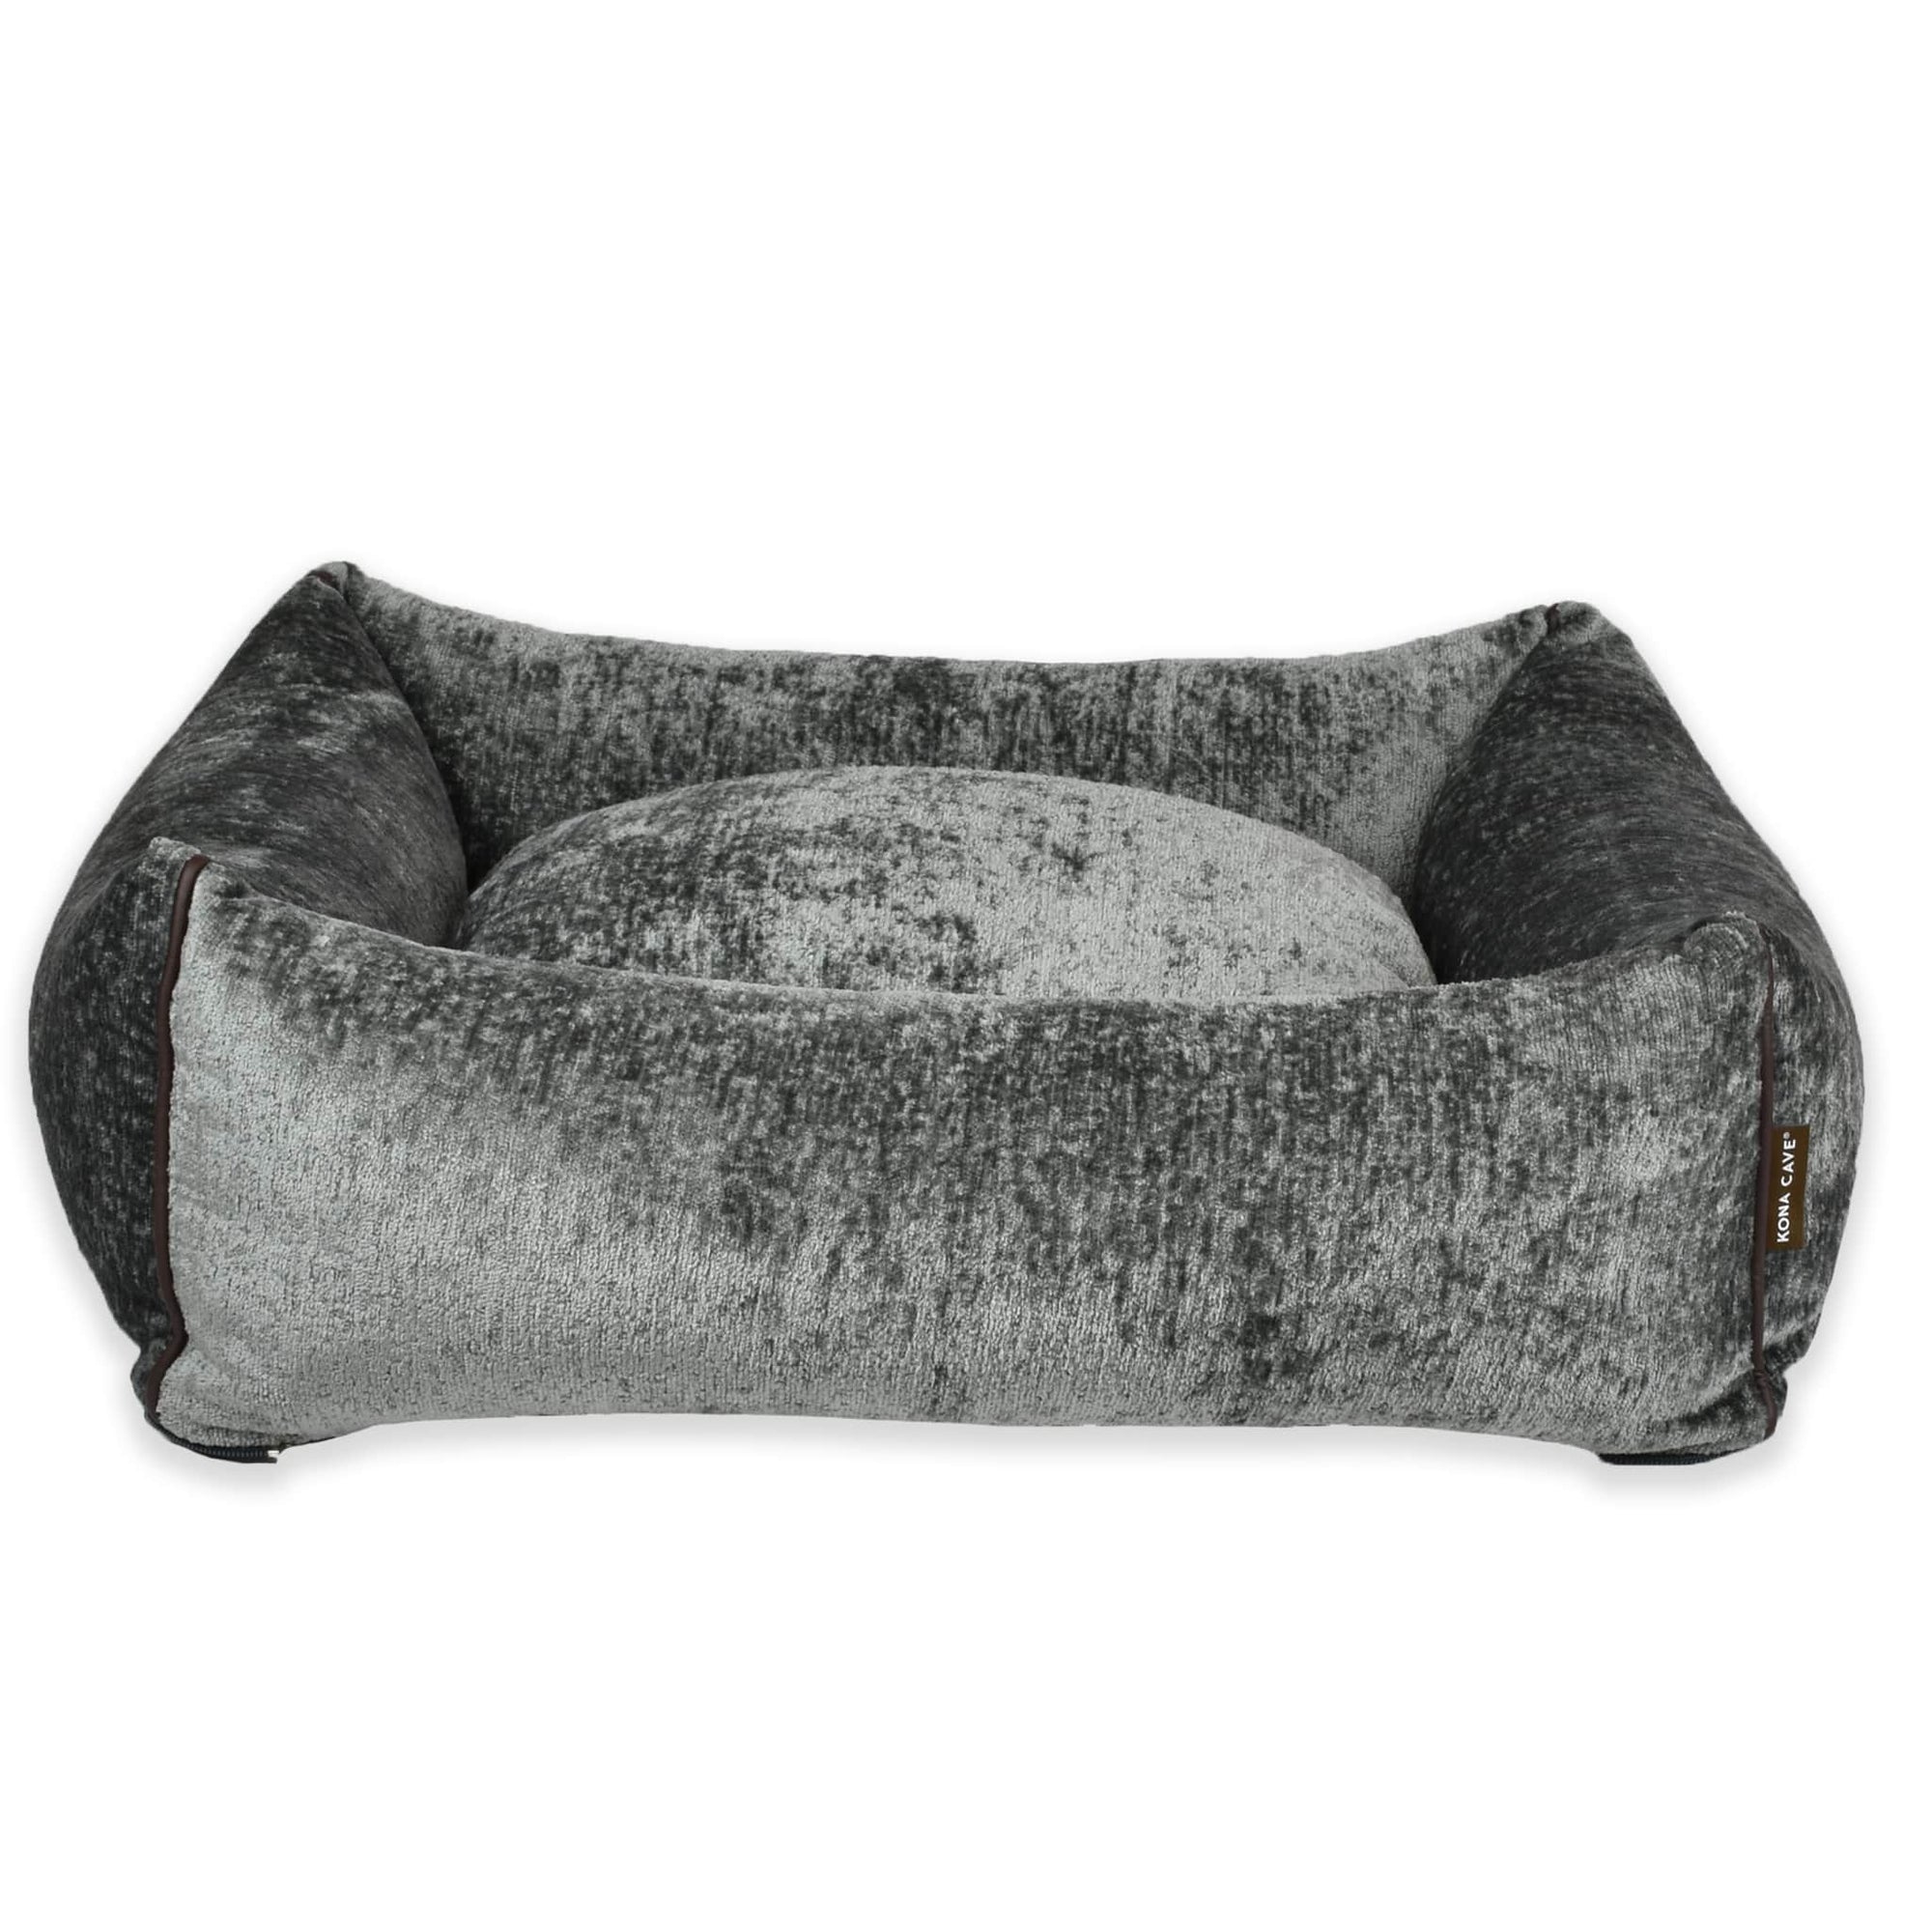 KONA CAVE® luxury Cuddle cave with removable canopy cover. Velvet Chenile Dog and cat Bed. 